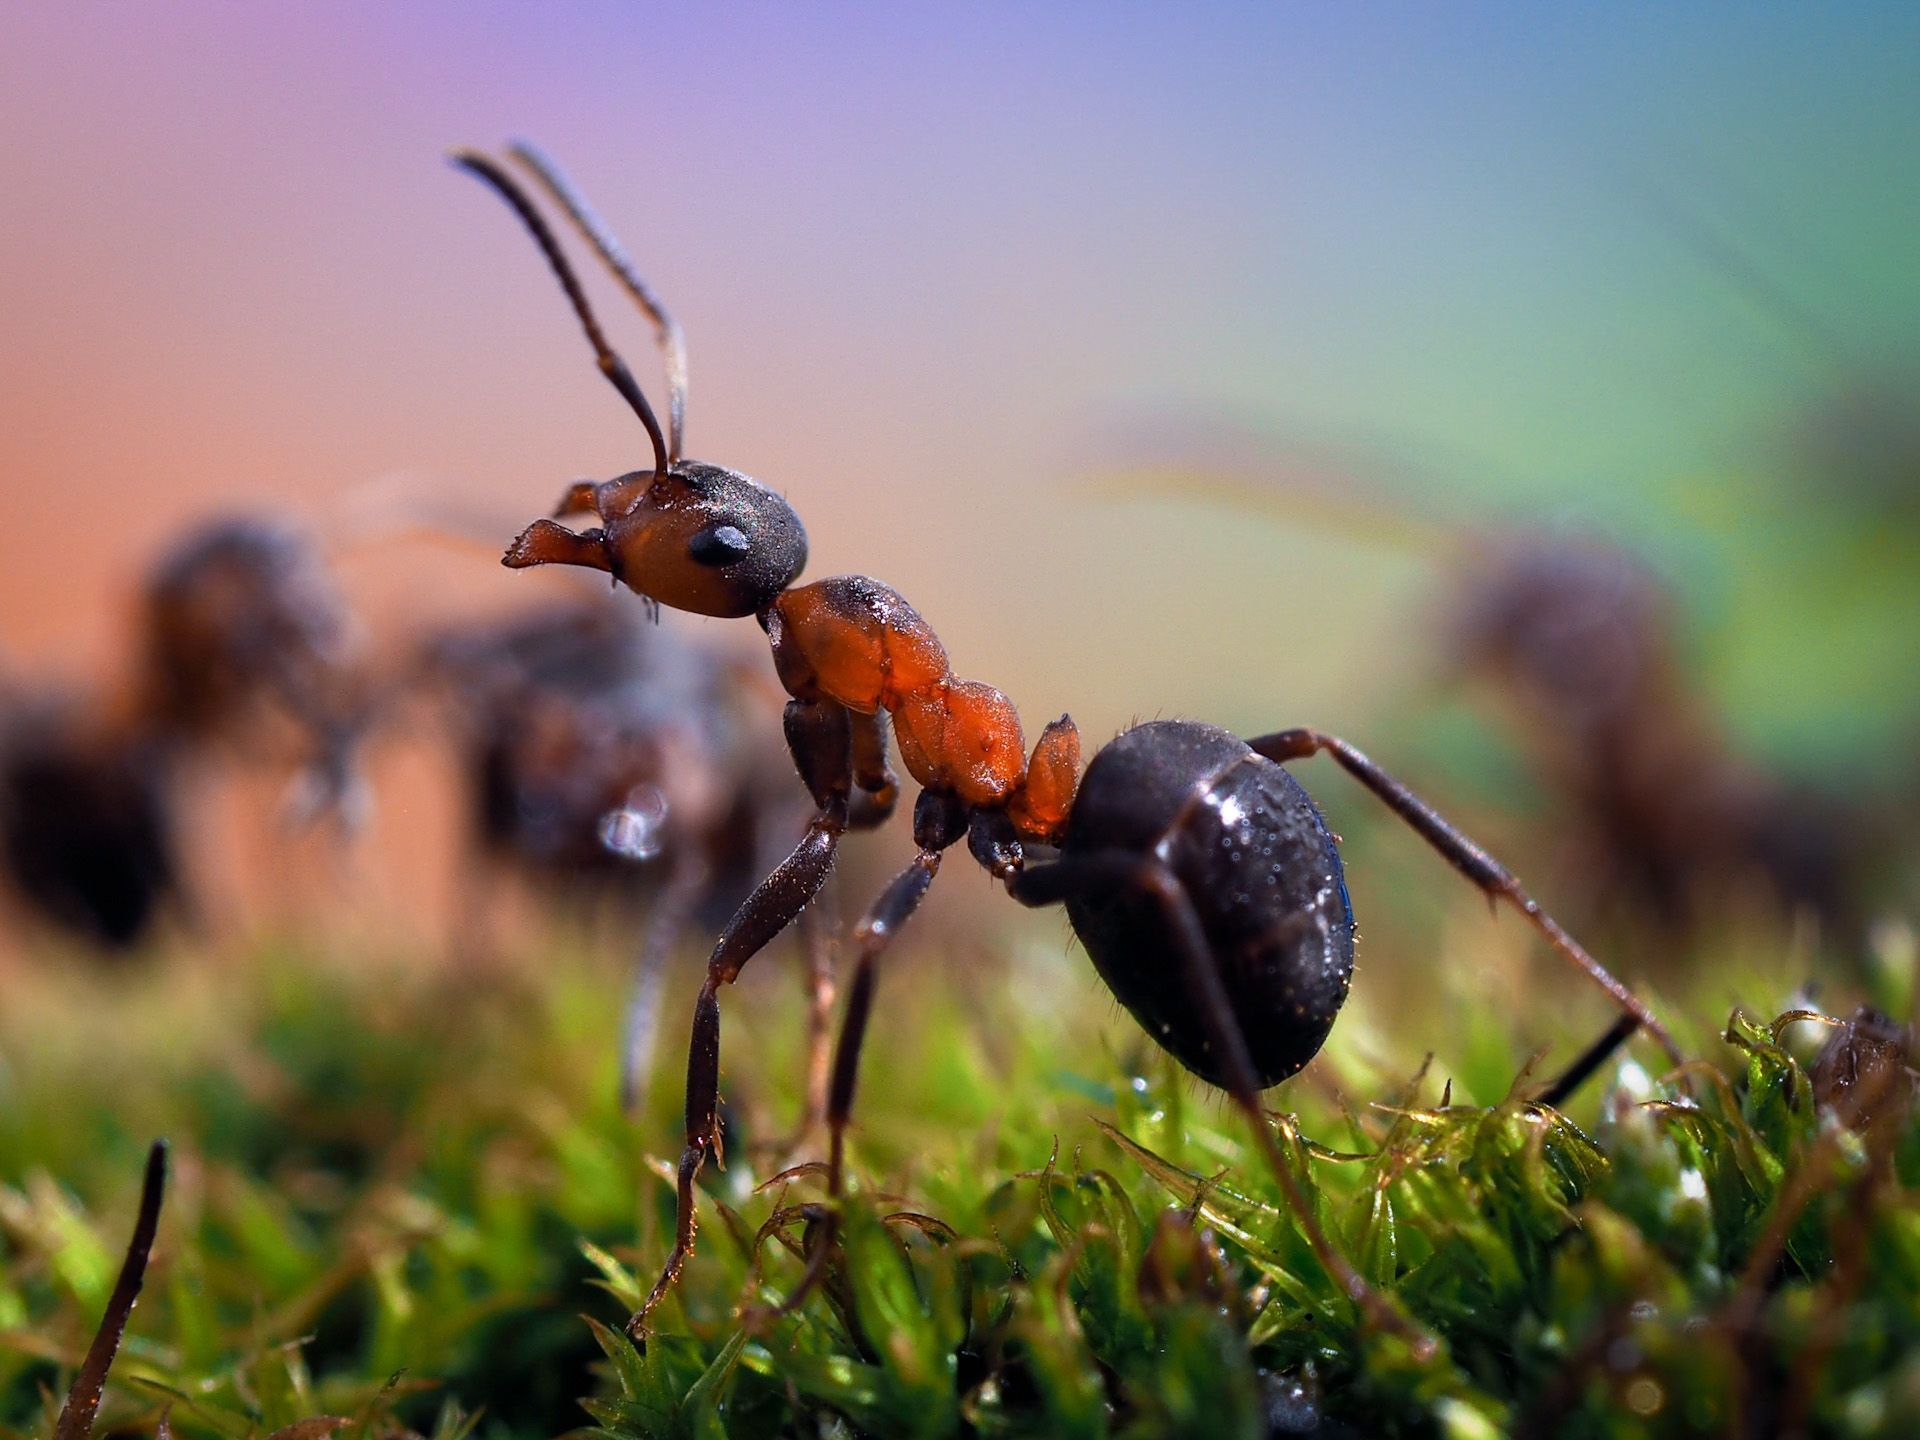 A close up of an ant walking on the grass